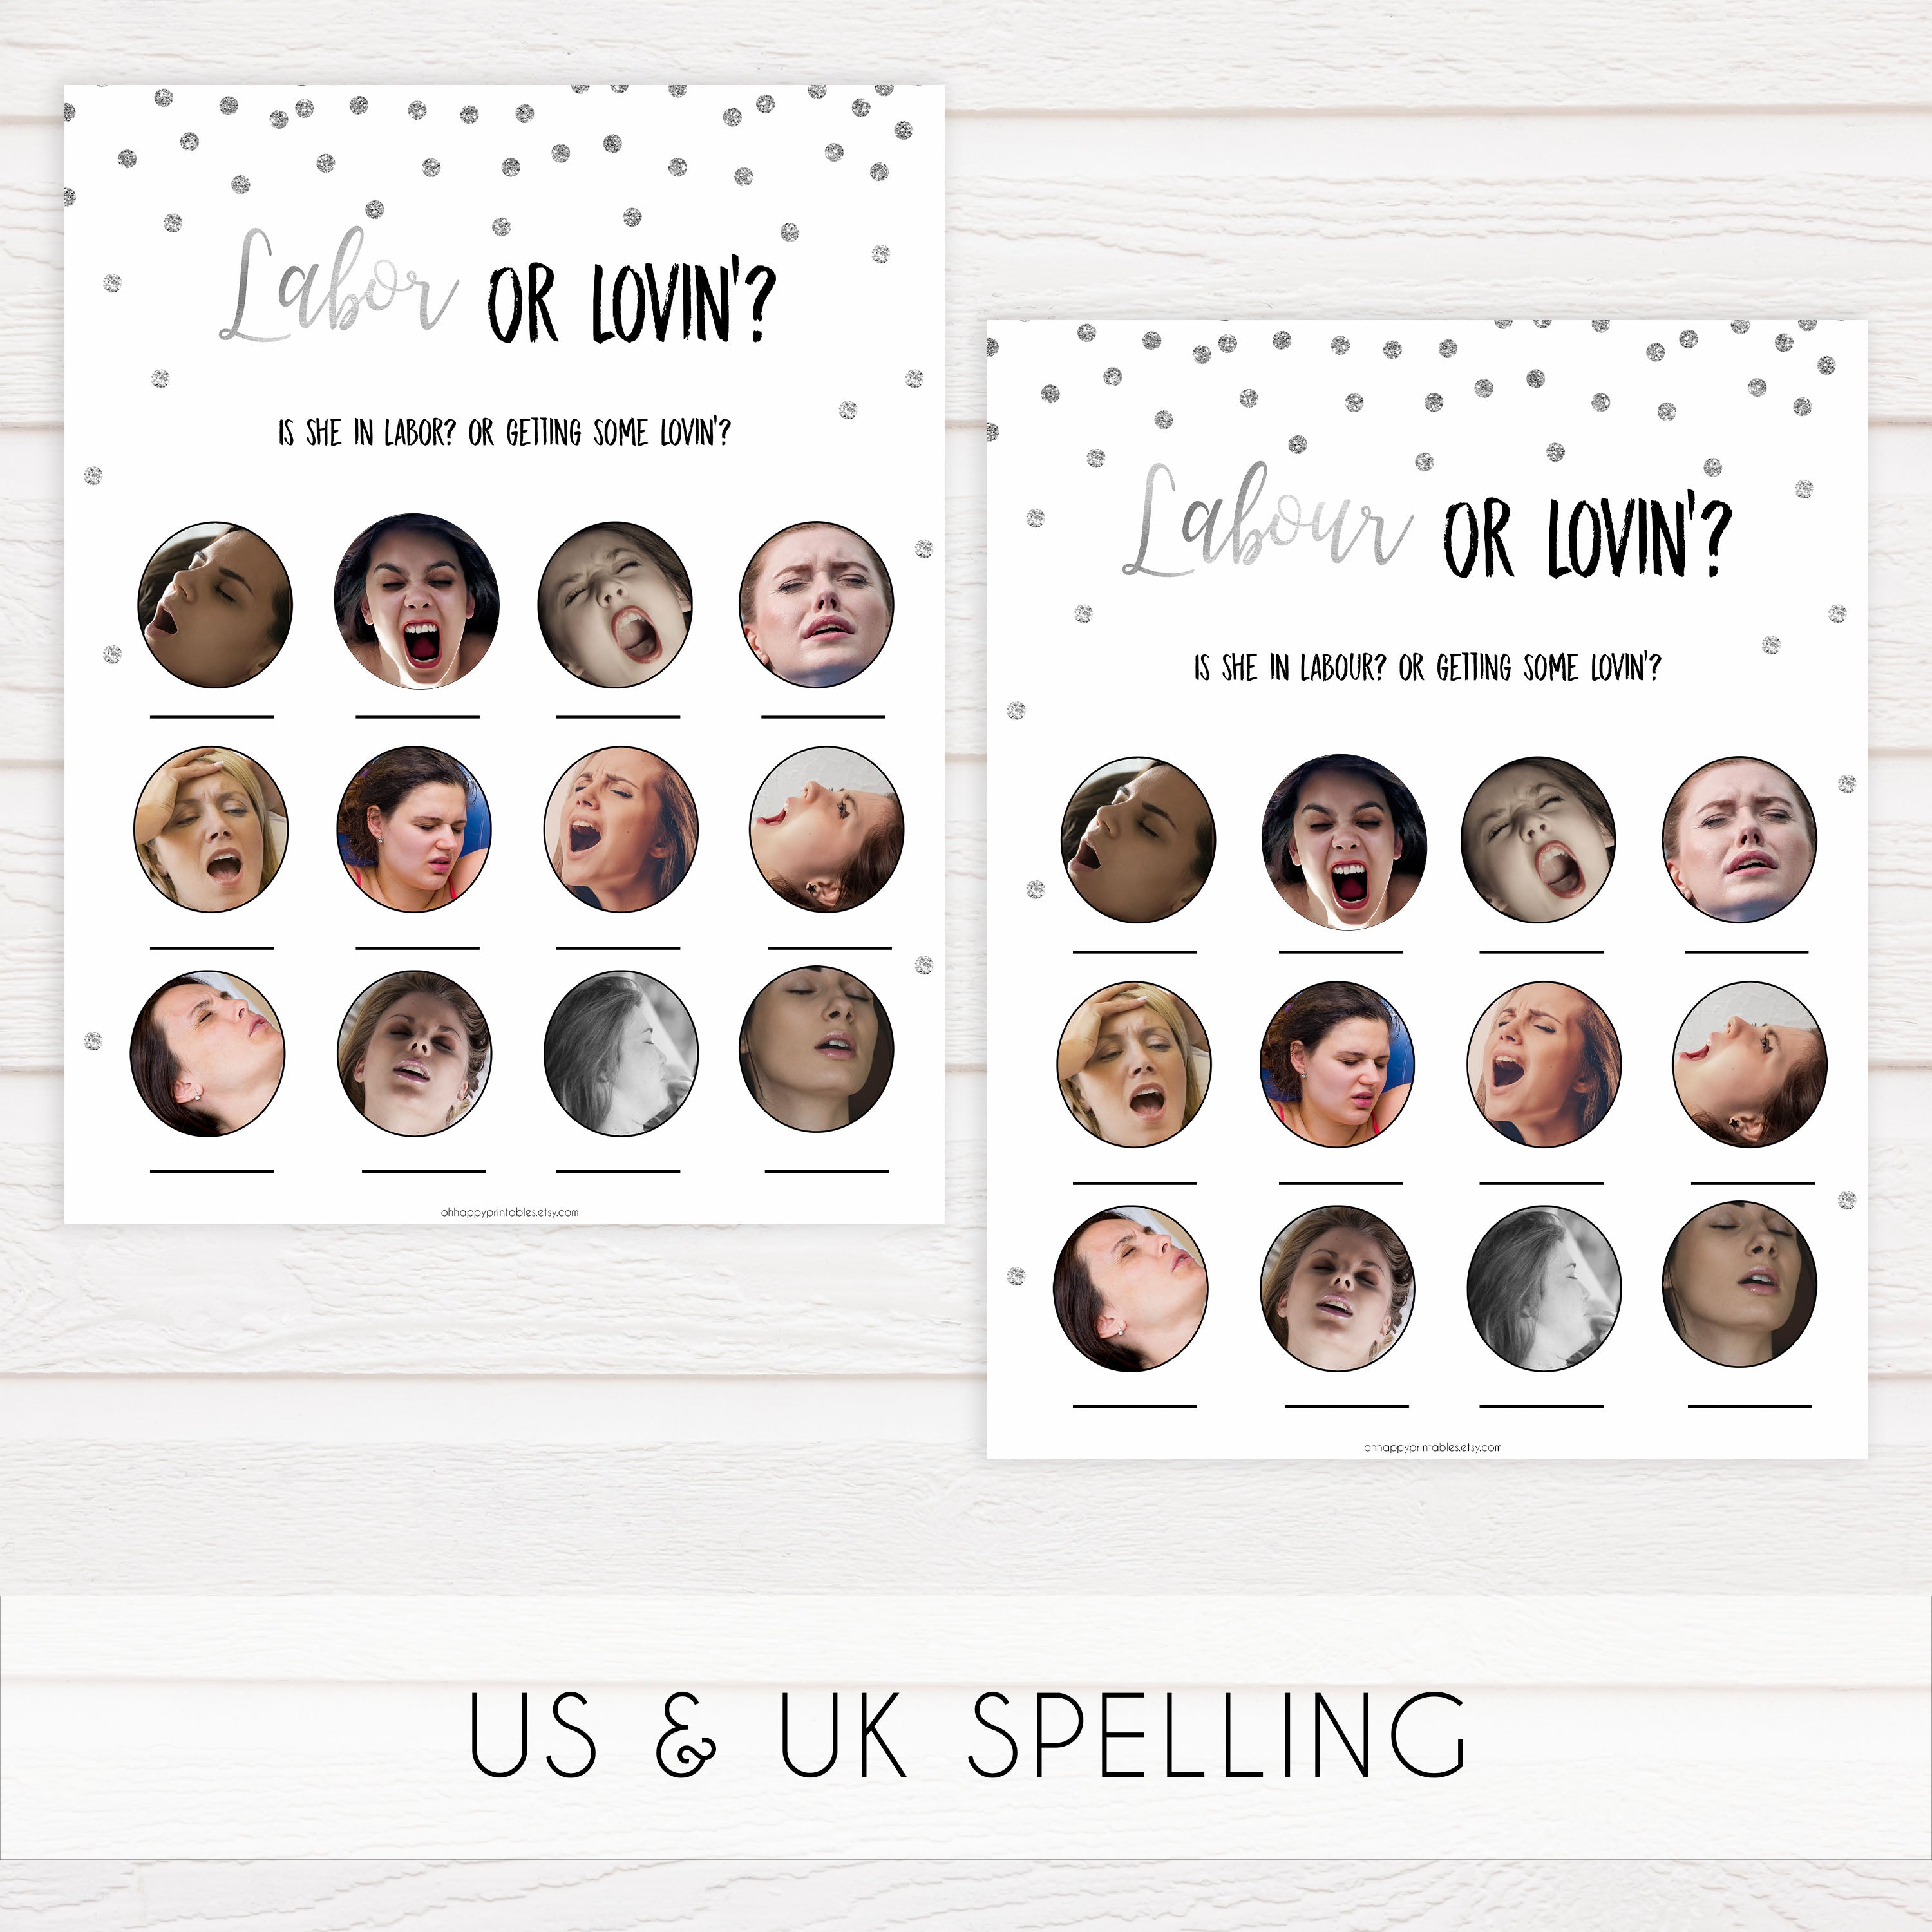 labor or lovin, labor or porn game, Printable baby shower games, baby silver glitter fun baby games, baby shower games, fun baby shower ideas, top baby shower ideas, silver glitter shower baby shower, friends baby shower ideas